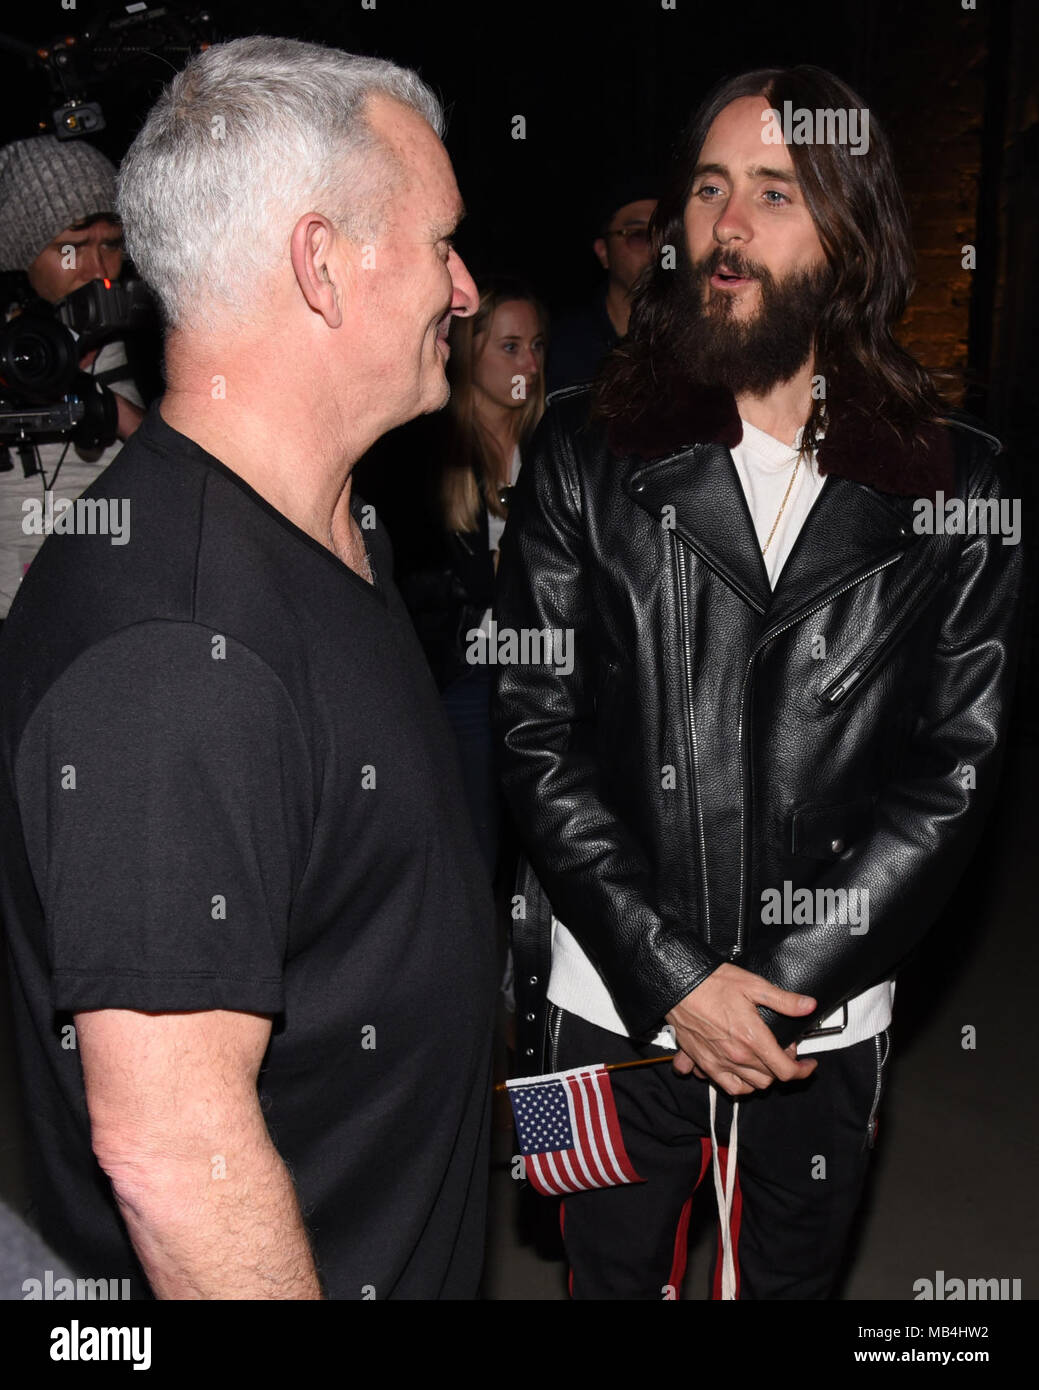 Los Angeles, USA. 06th Apr, 2018. Jared Leto attends the Thirty Seconds To Mars 'Mars Across America Tour' at The Museum of America Pop-Up release party for the 'America' album at Hubble Studios on April 6, 2018 in Los Angeles, California. Credit: The Photo Access/Alamy Live News Stock Photo